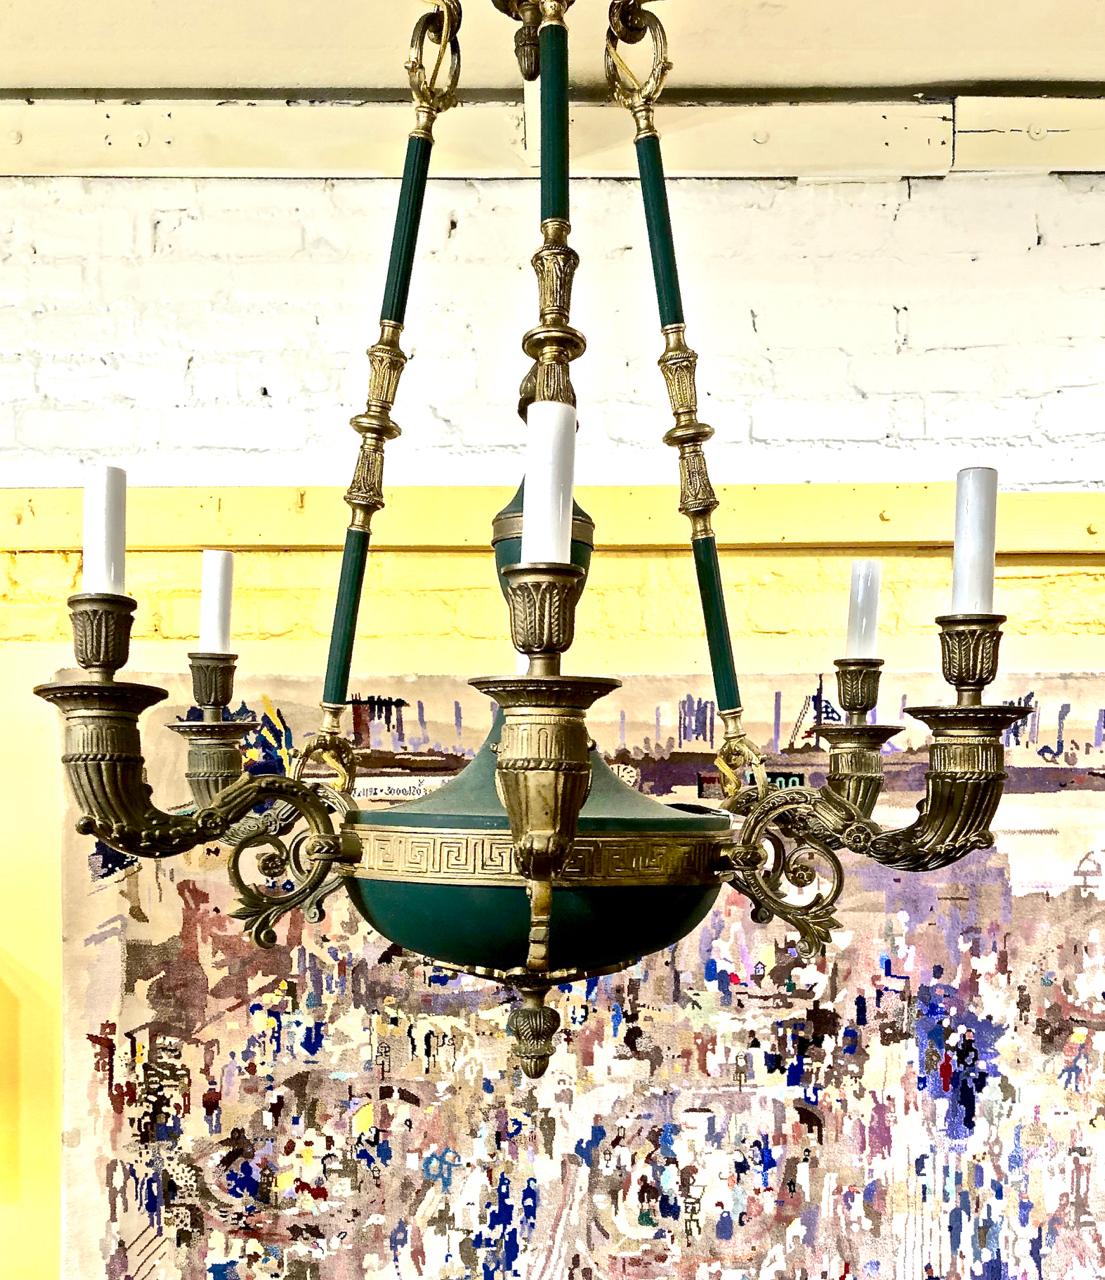 This is an early 20th century example of a Classic French Empire bronze chandelier. The French green tone of the painted metal contrasts beautifully with the dore bronze mounts and decorations. The chandelier is suspended on three bronze detailed